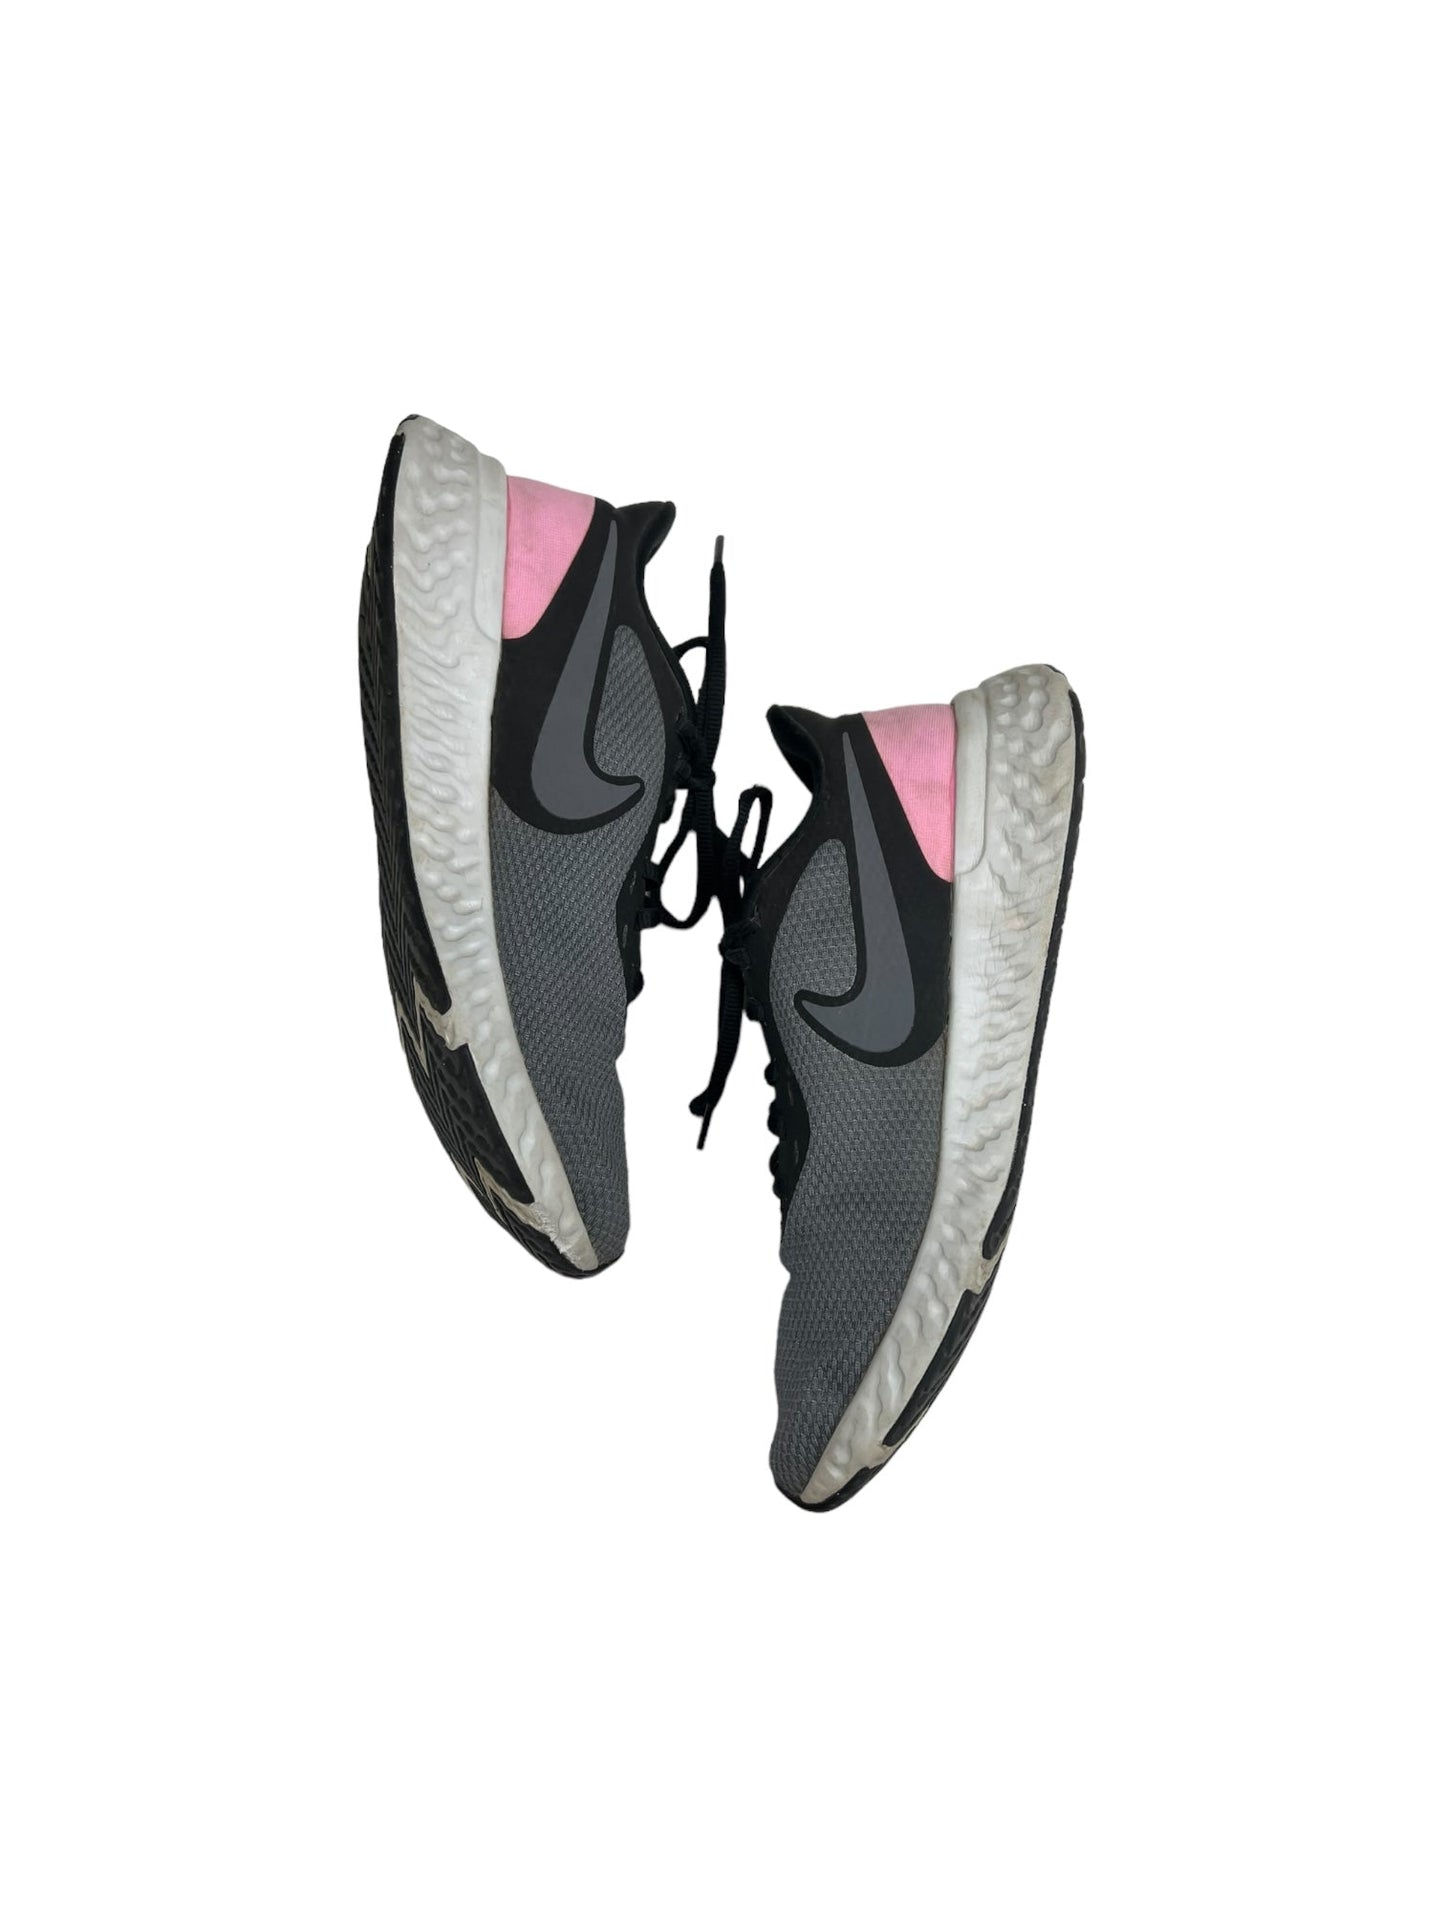 Grey & Pink Shoes Athletic Nike, Size 8